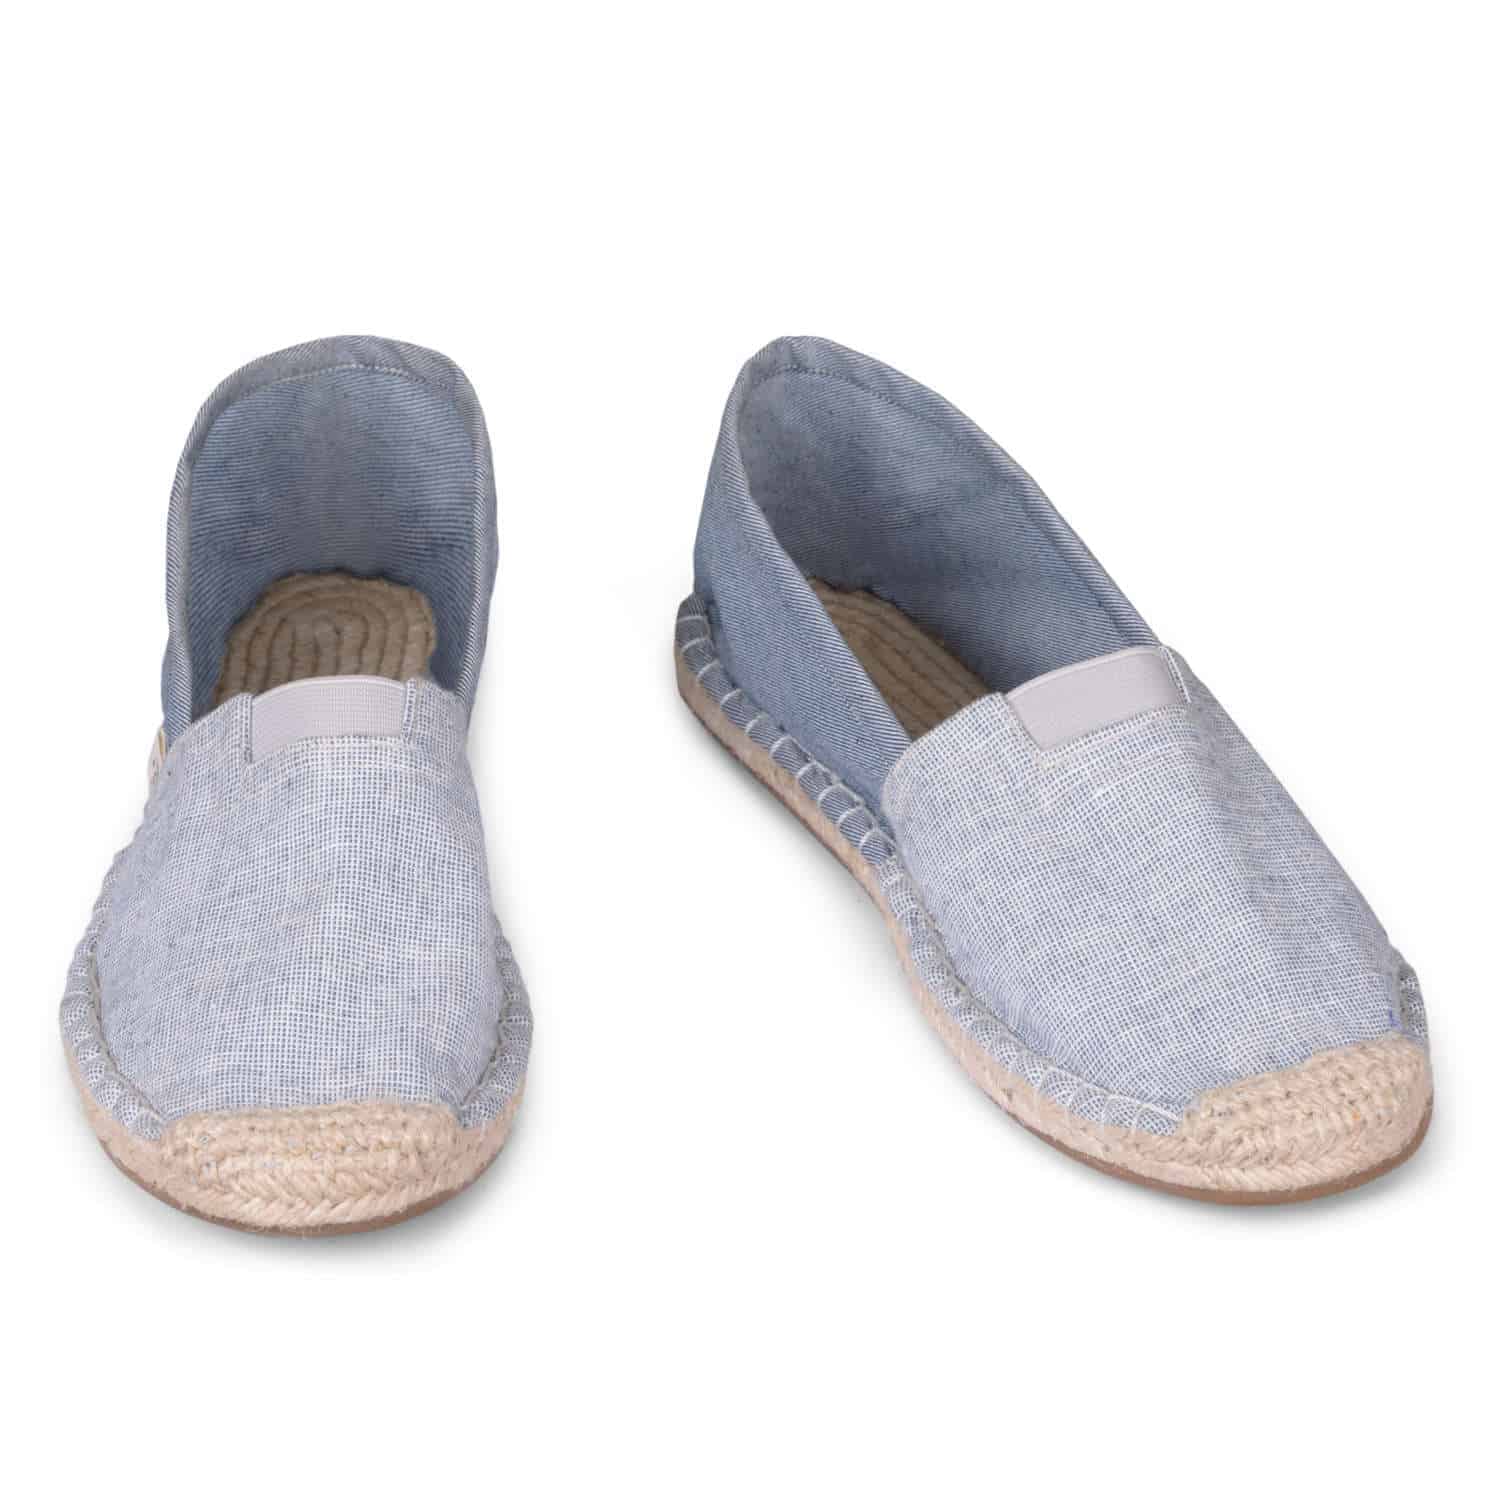 Caesious Blue ExtraFit Espadrilles for Women - Kingdom of Wow - US